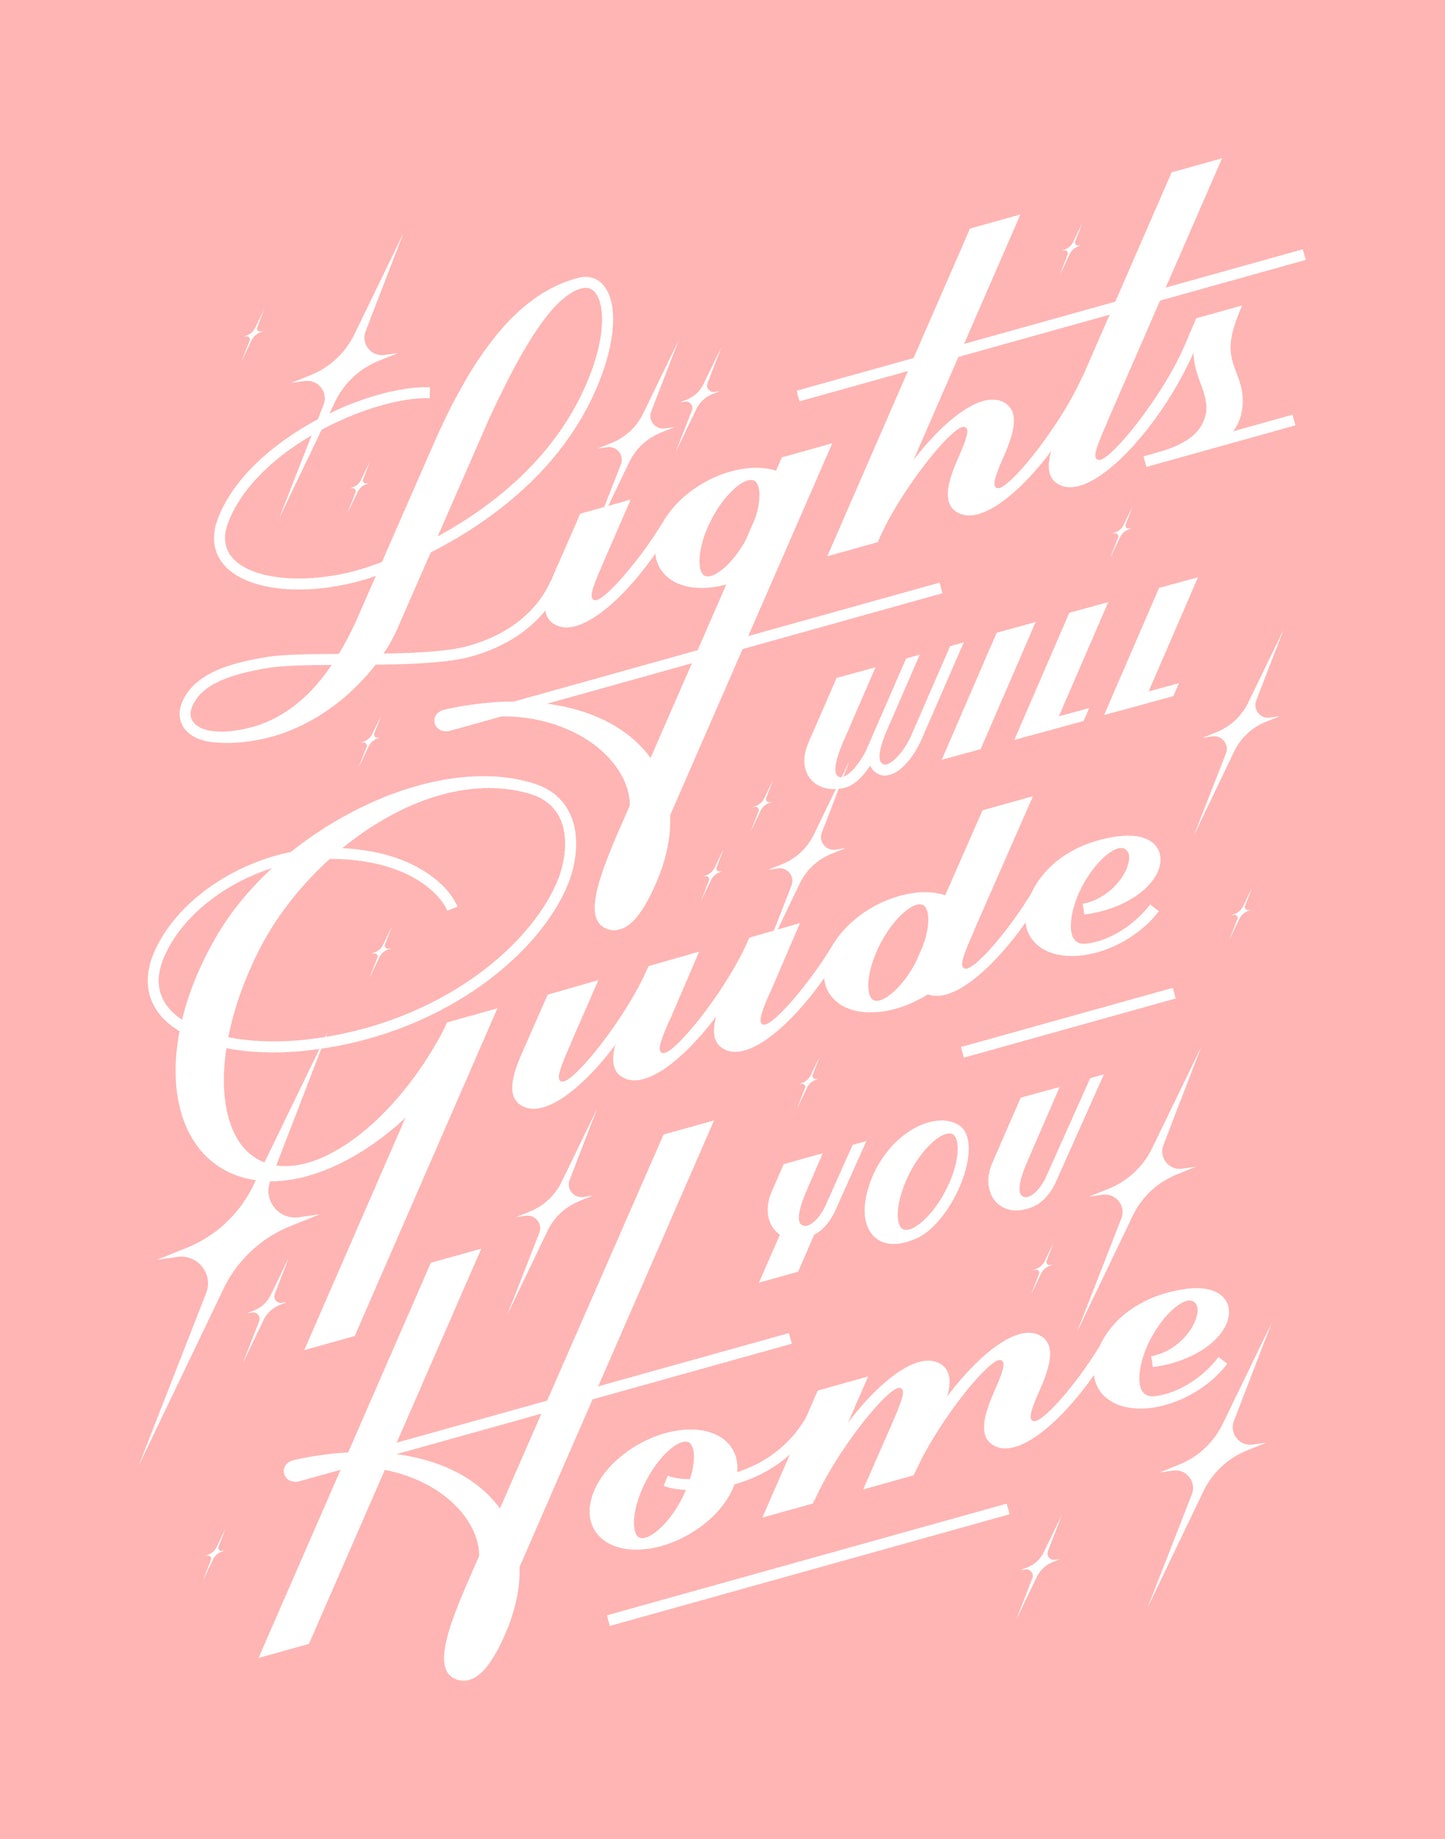 Nyte - "Lights Will Guide you Home"